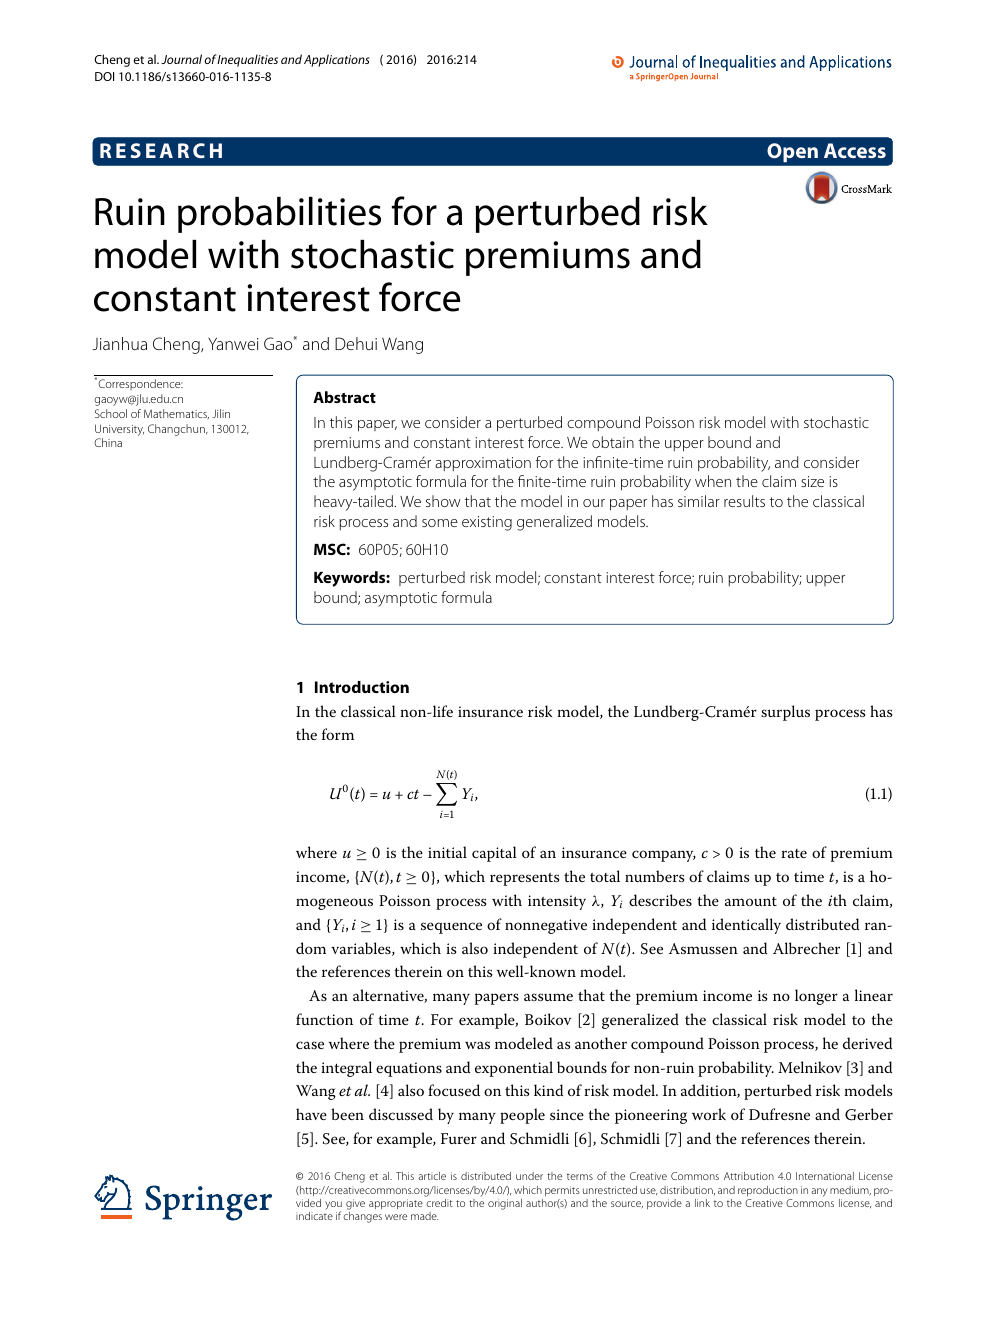 Ruin Probabilities For A Perturbed Risk Model With Stochastic Premiums And Constant Interest Force Topic Of Research Paper In Mathematics Download Scholarly Article Pdf And Read For Free On Cyberleninka Open